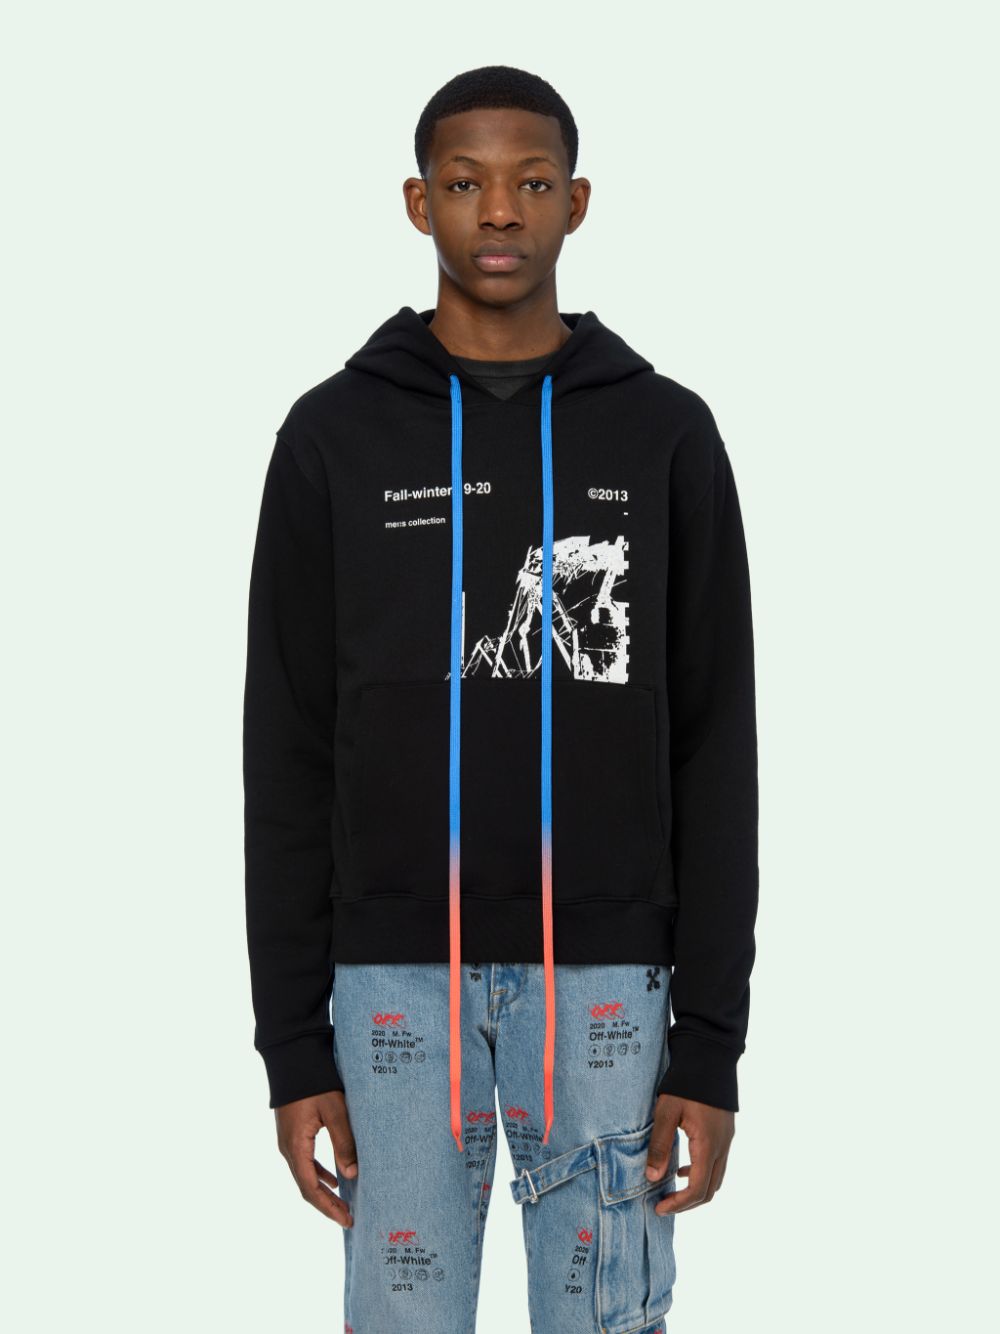 99 off white hoodie